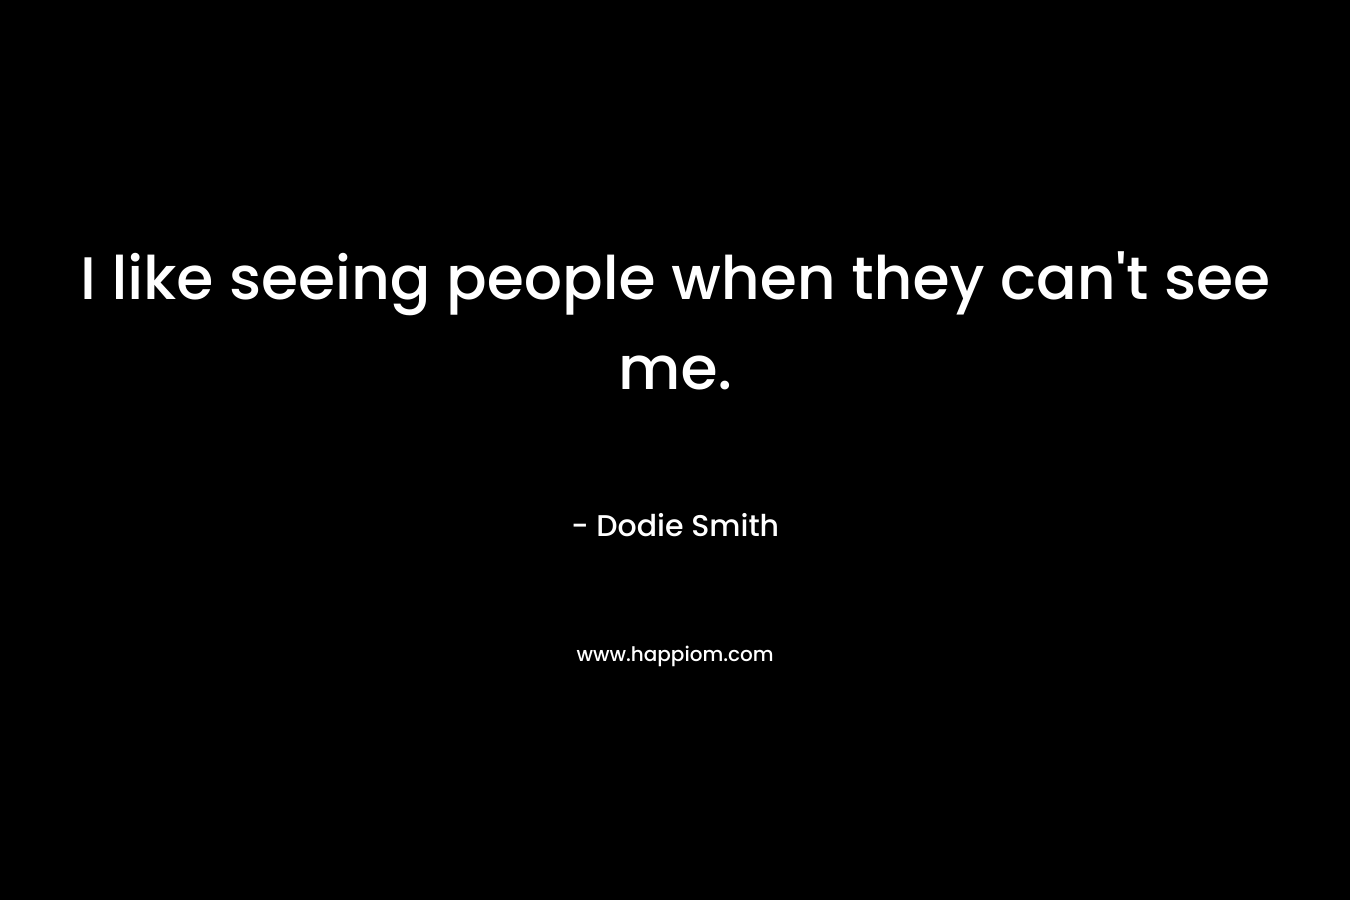 I like seeing people when they can’t see me. – Dodie Smith